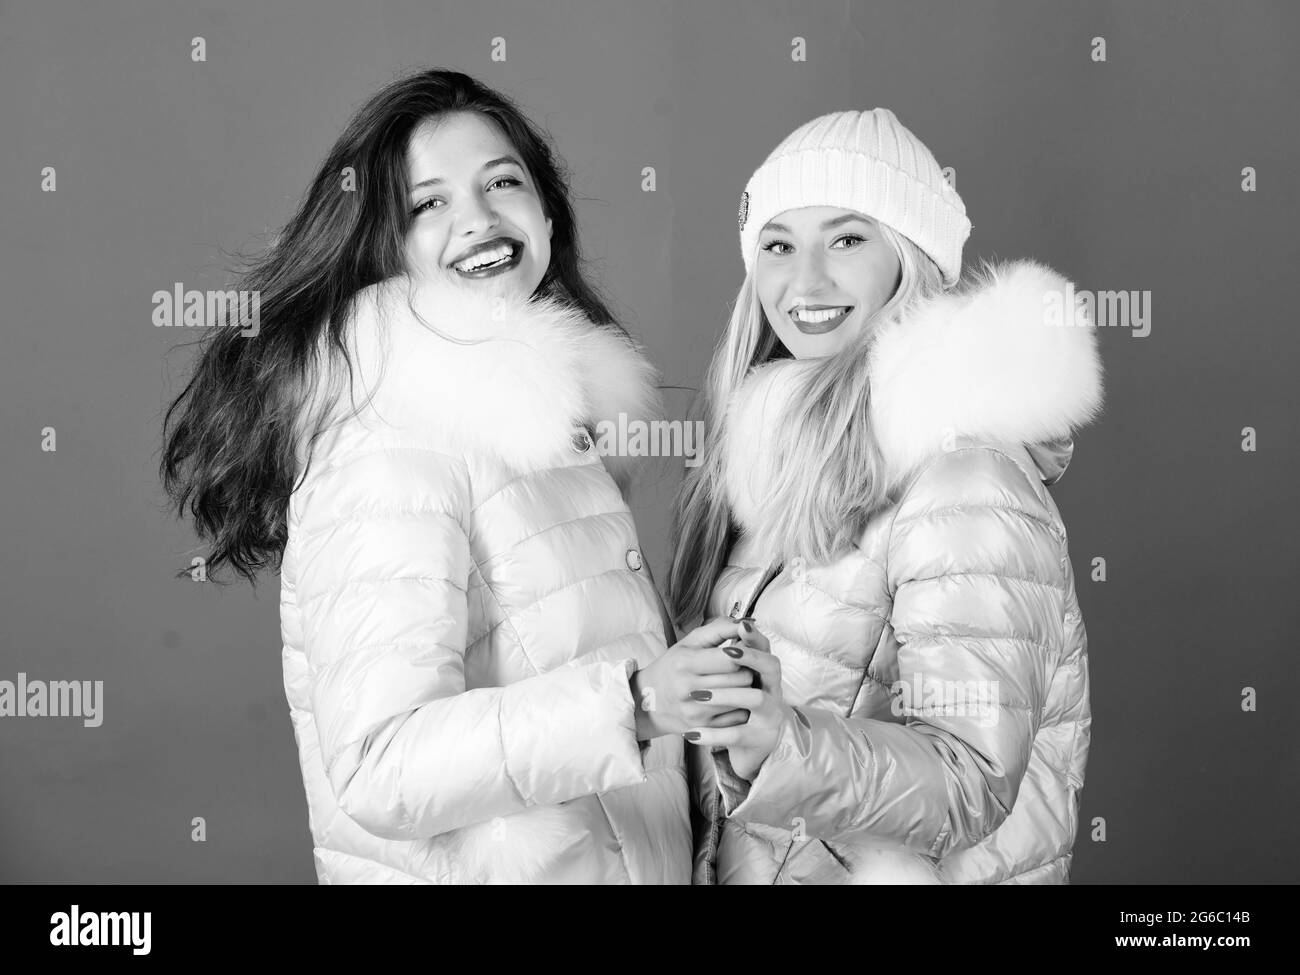 Fashion friends. Winter clothes. Women wear down jacket with furry hood. Girls smiling makeup faces wear jackets blue background. Winter season Stock Photo